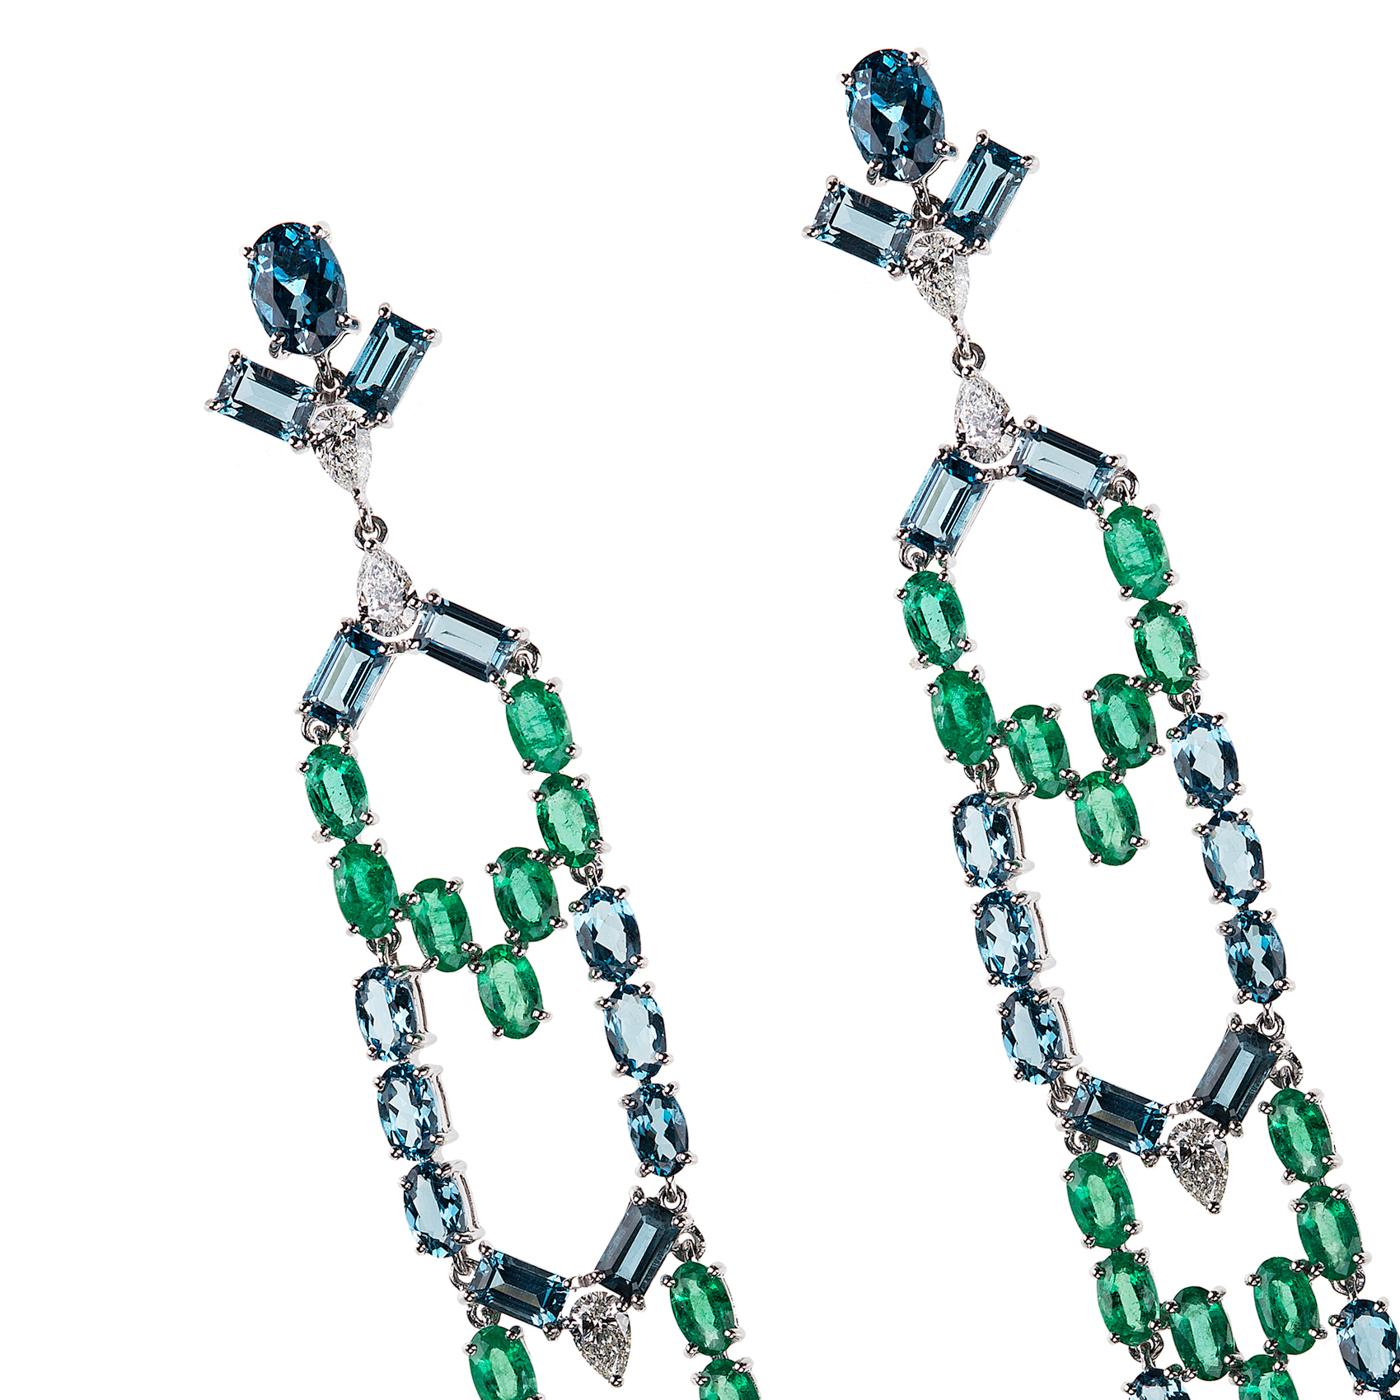 Nikos Koulis Eden collection one-of-a-kind 18K white gold earrings with 6.20 cts emeralds, 1.50 cts white diamonds, 15.41 cts London blue topazes